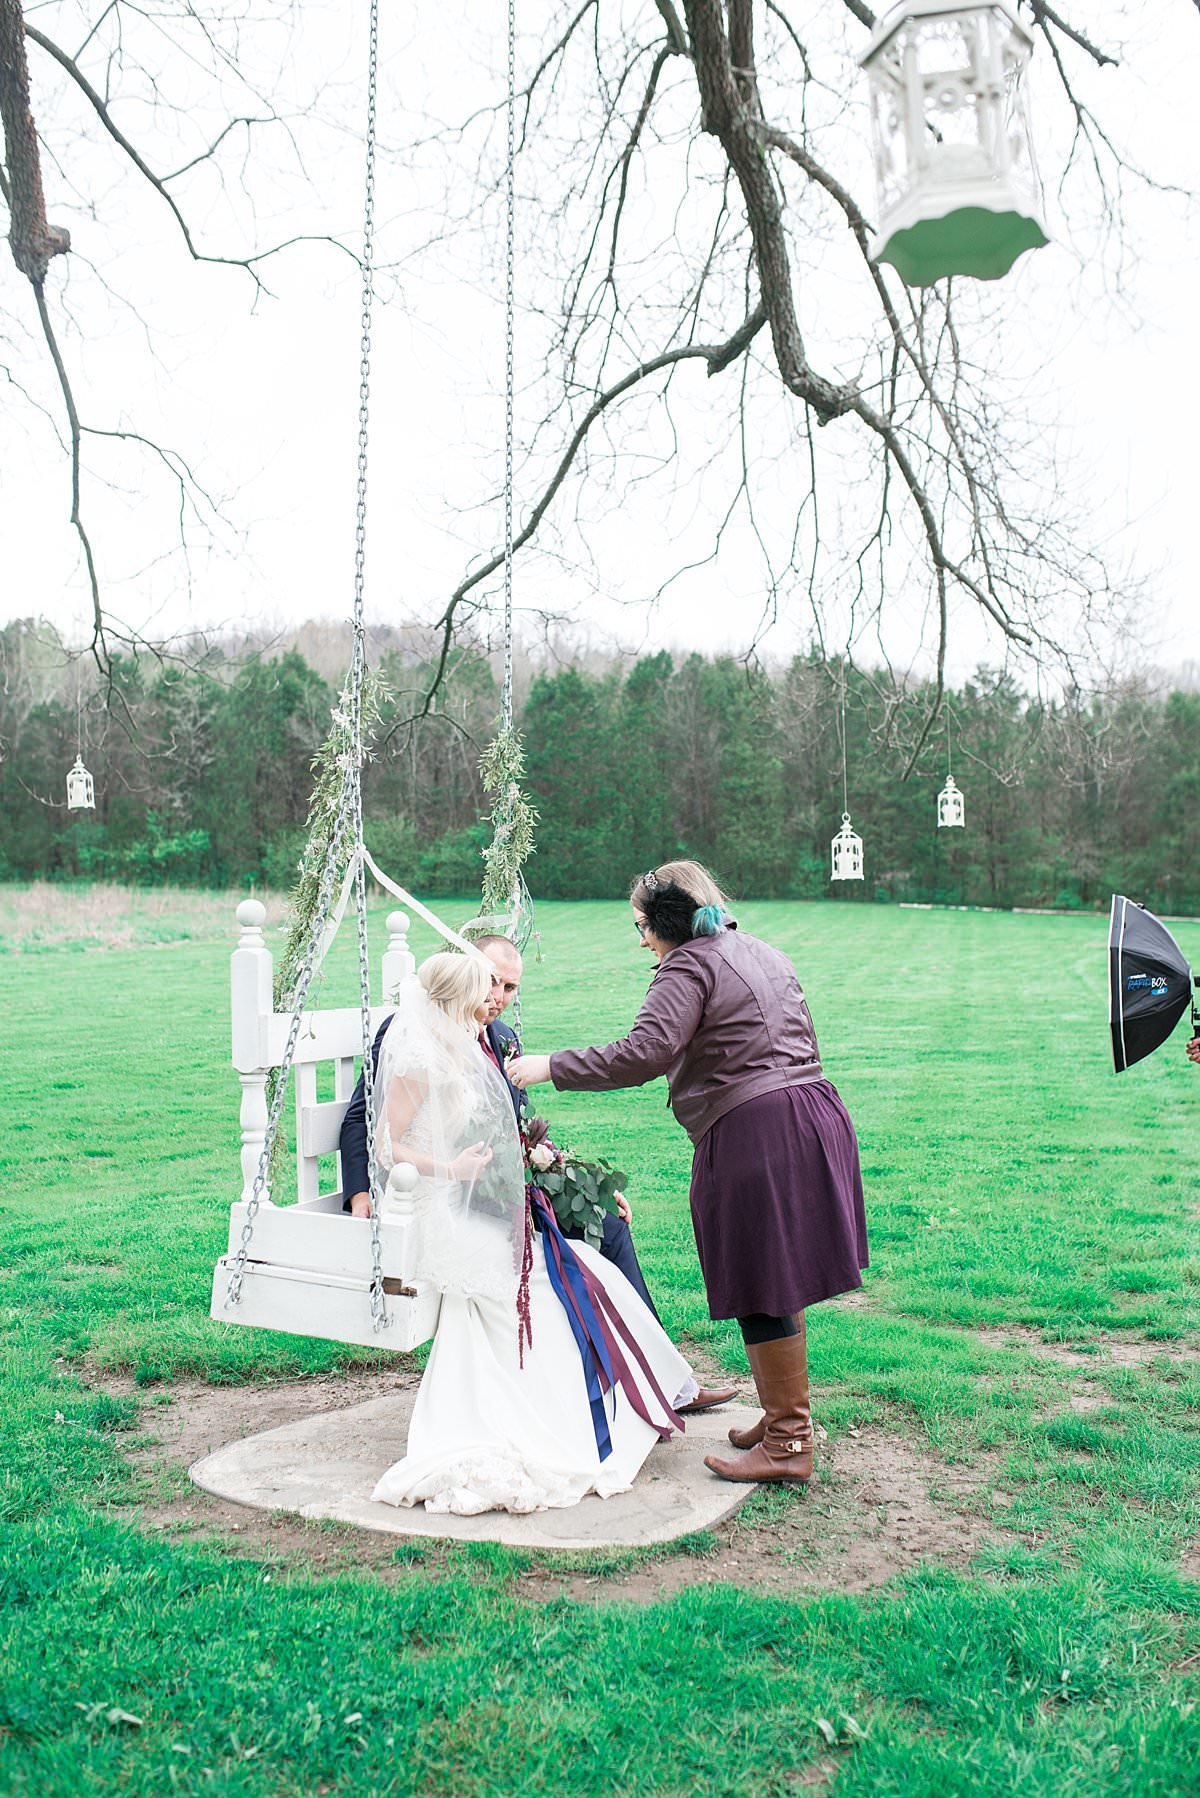 Behind the scenes photo of wedding photographer adjusting brides veil during couples portraits on the swing at Drakewood Farms